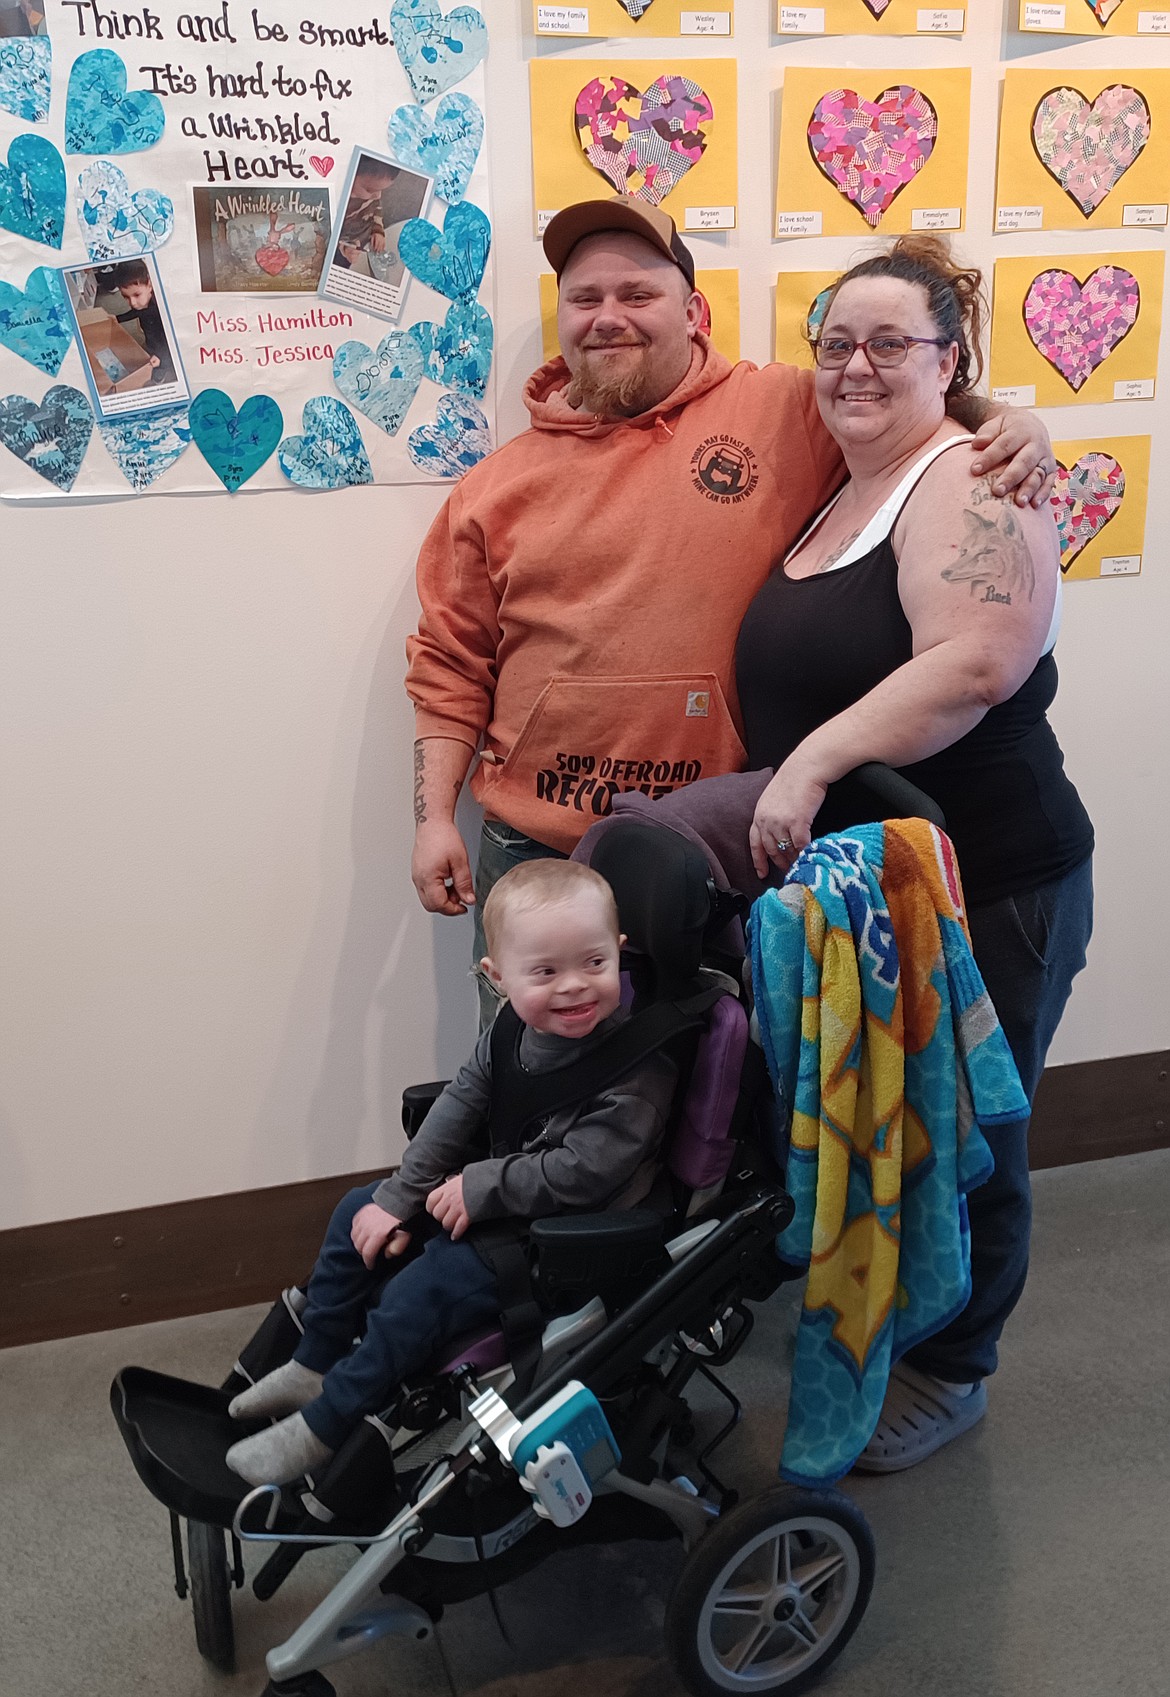 Three-year-old Dayton DeLange and his parents Wayne and Joleen DeLange stand in front of Dayton’s artwork at the Preschool Art Show reception Saturday.